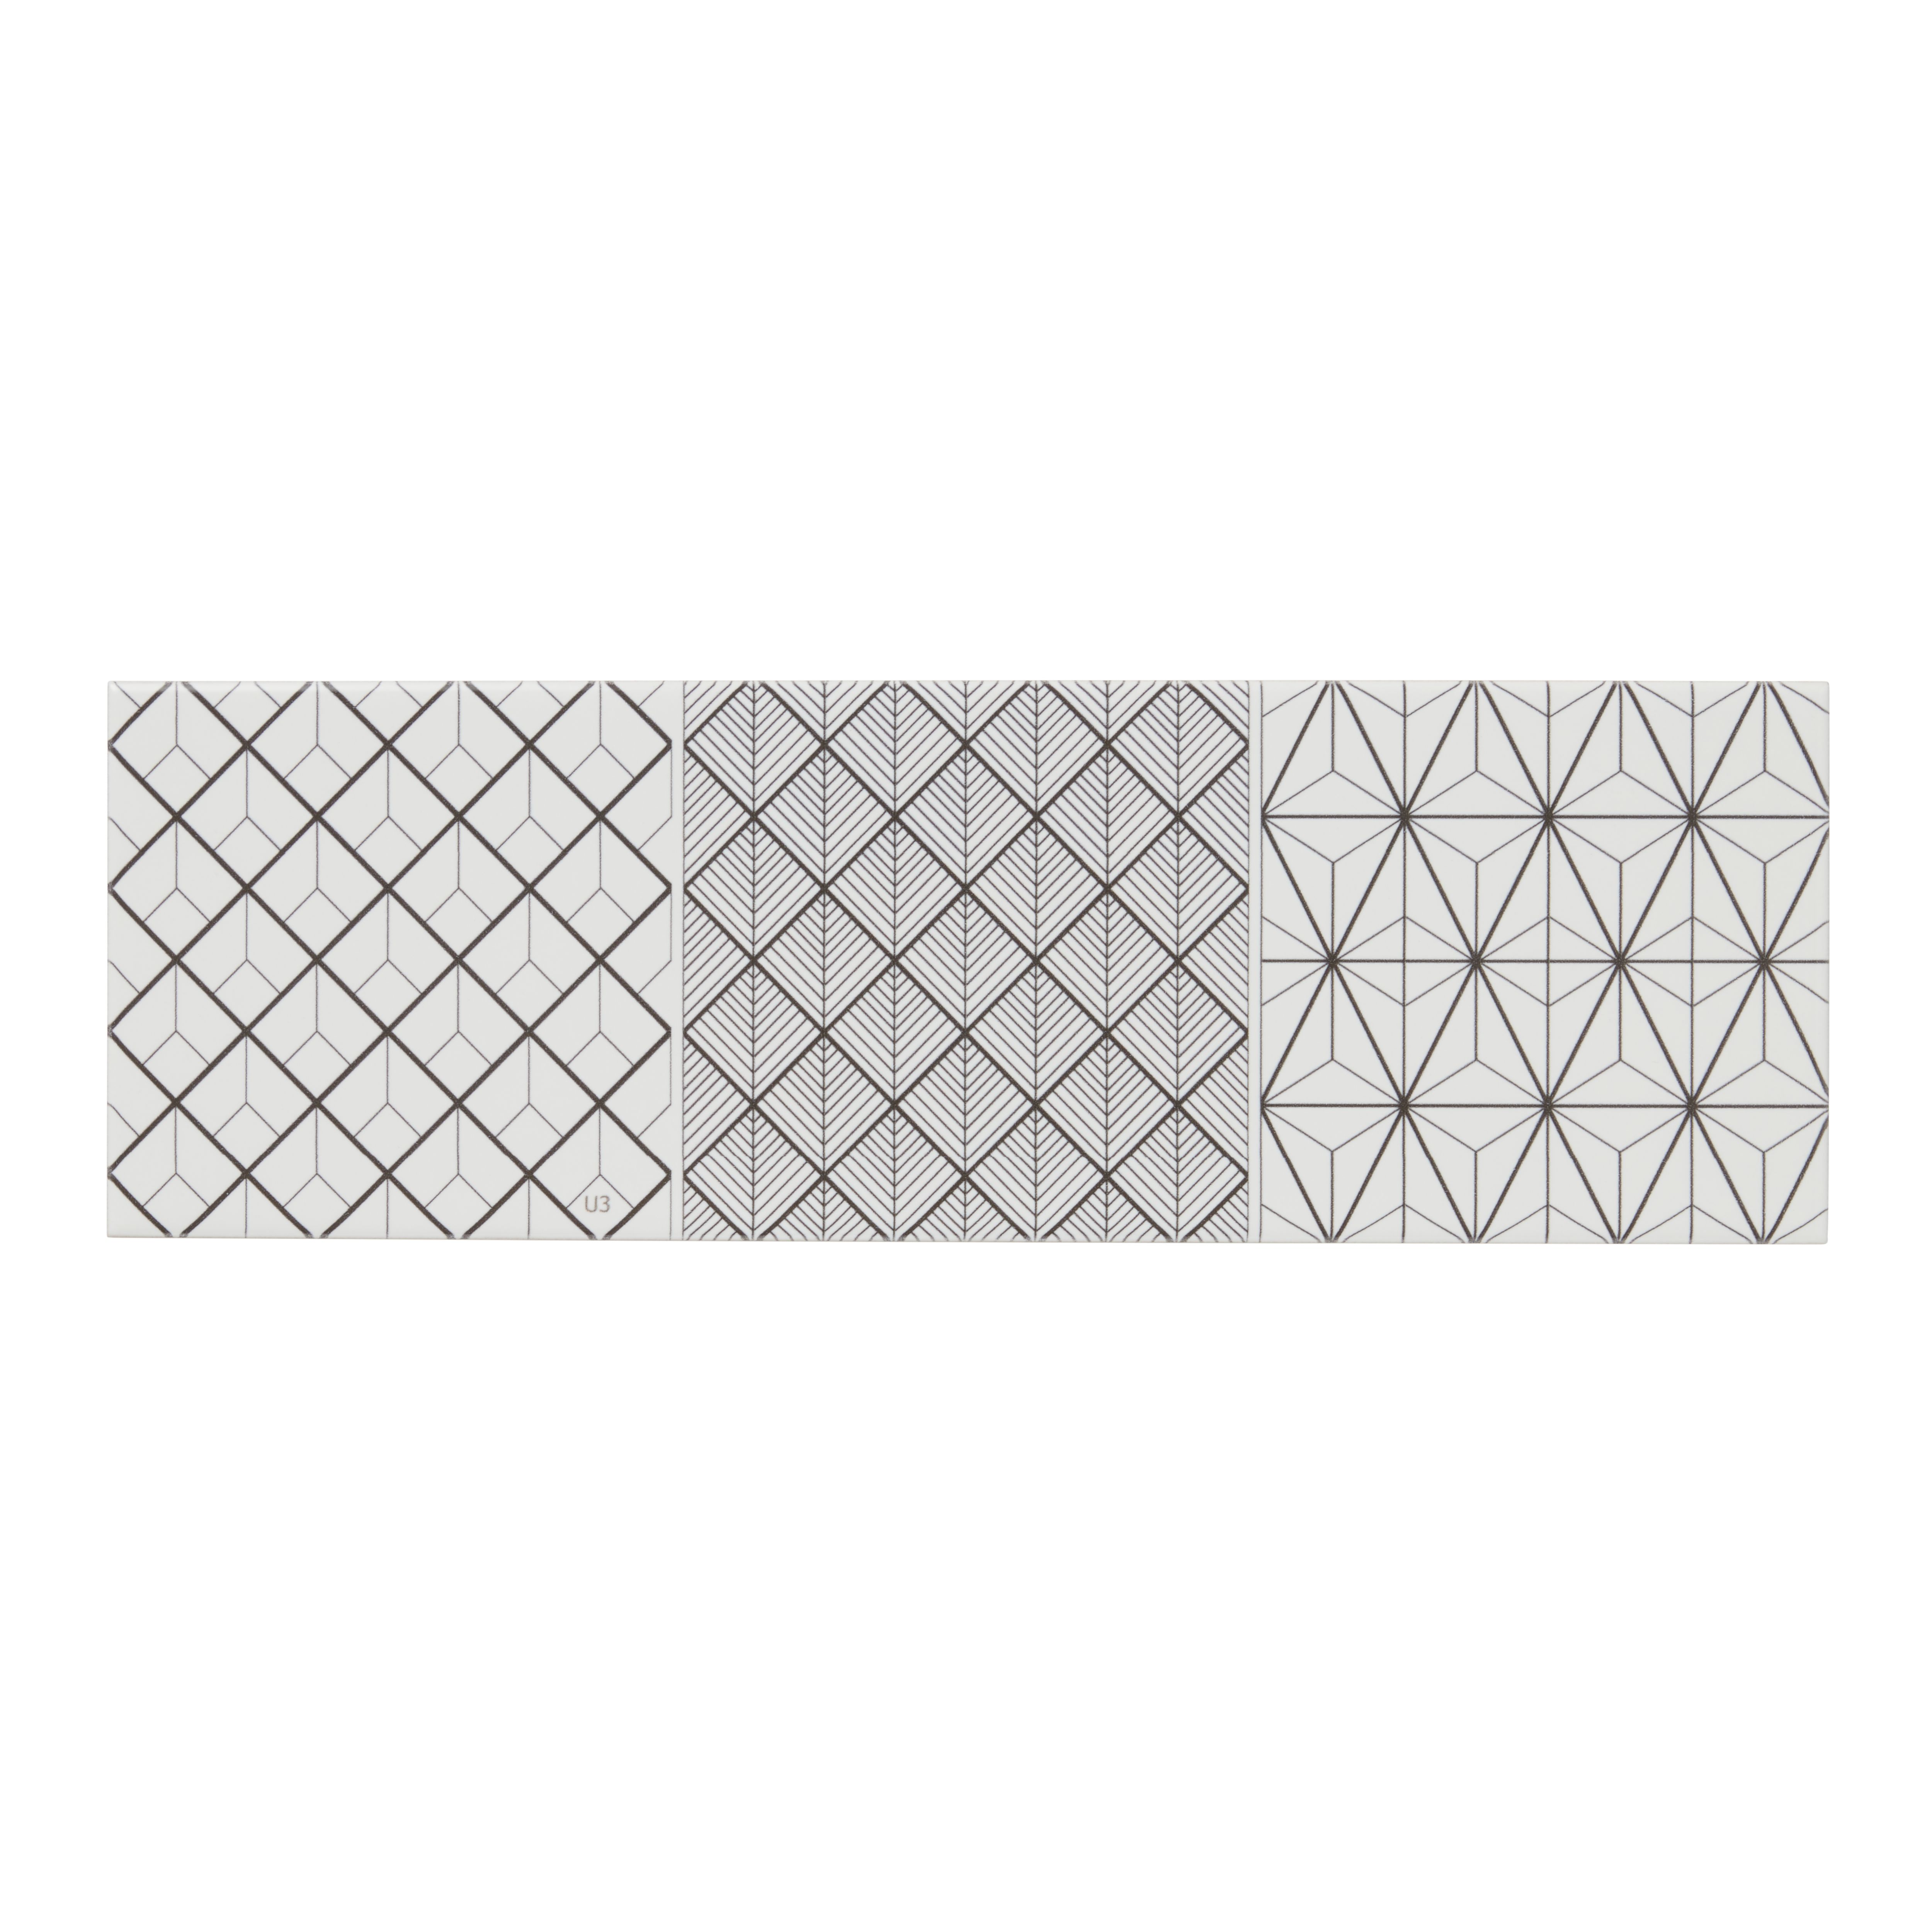 Glina Multicolour Gloss Patterned Ceramic Wall tile, Pack of 34, (L)297mm (W)97mm